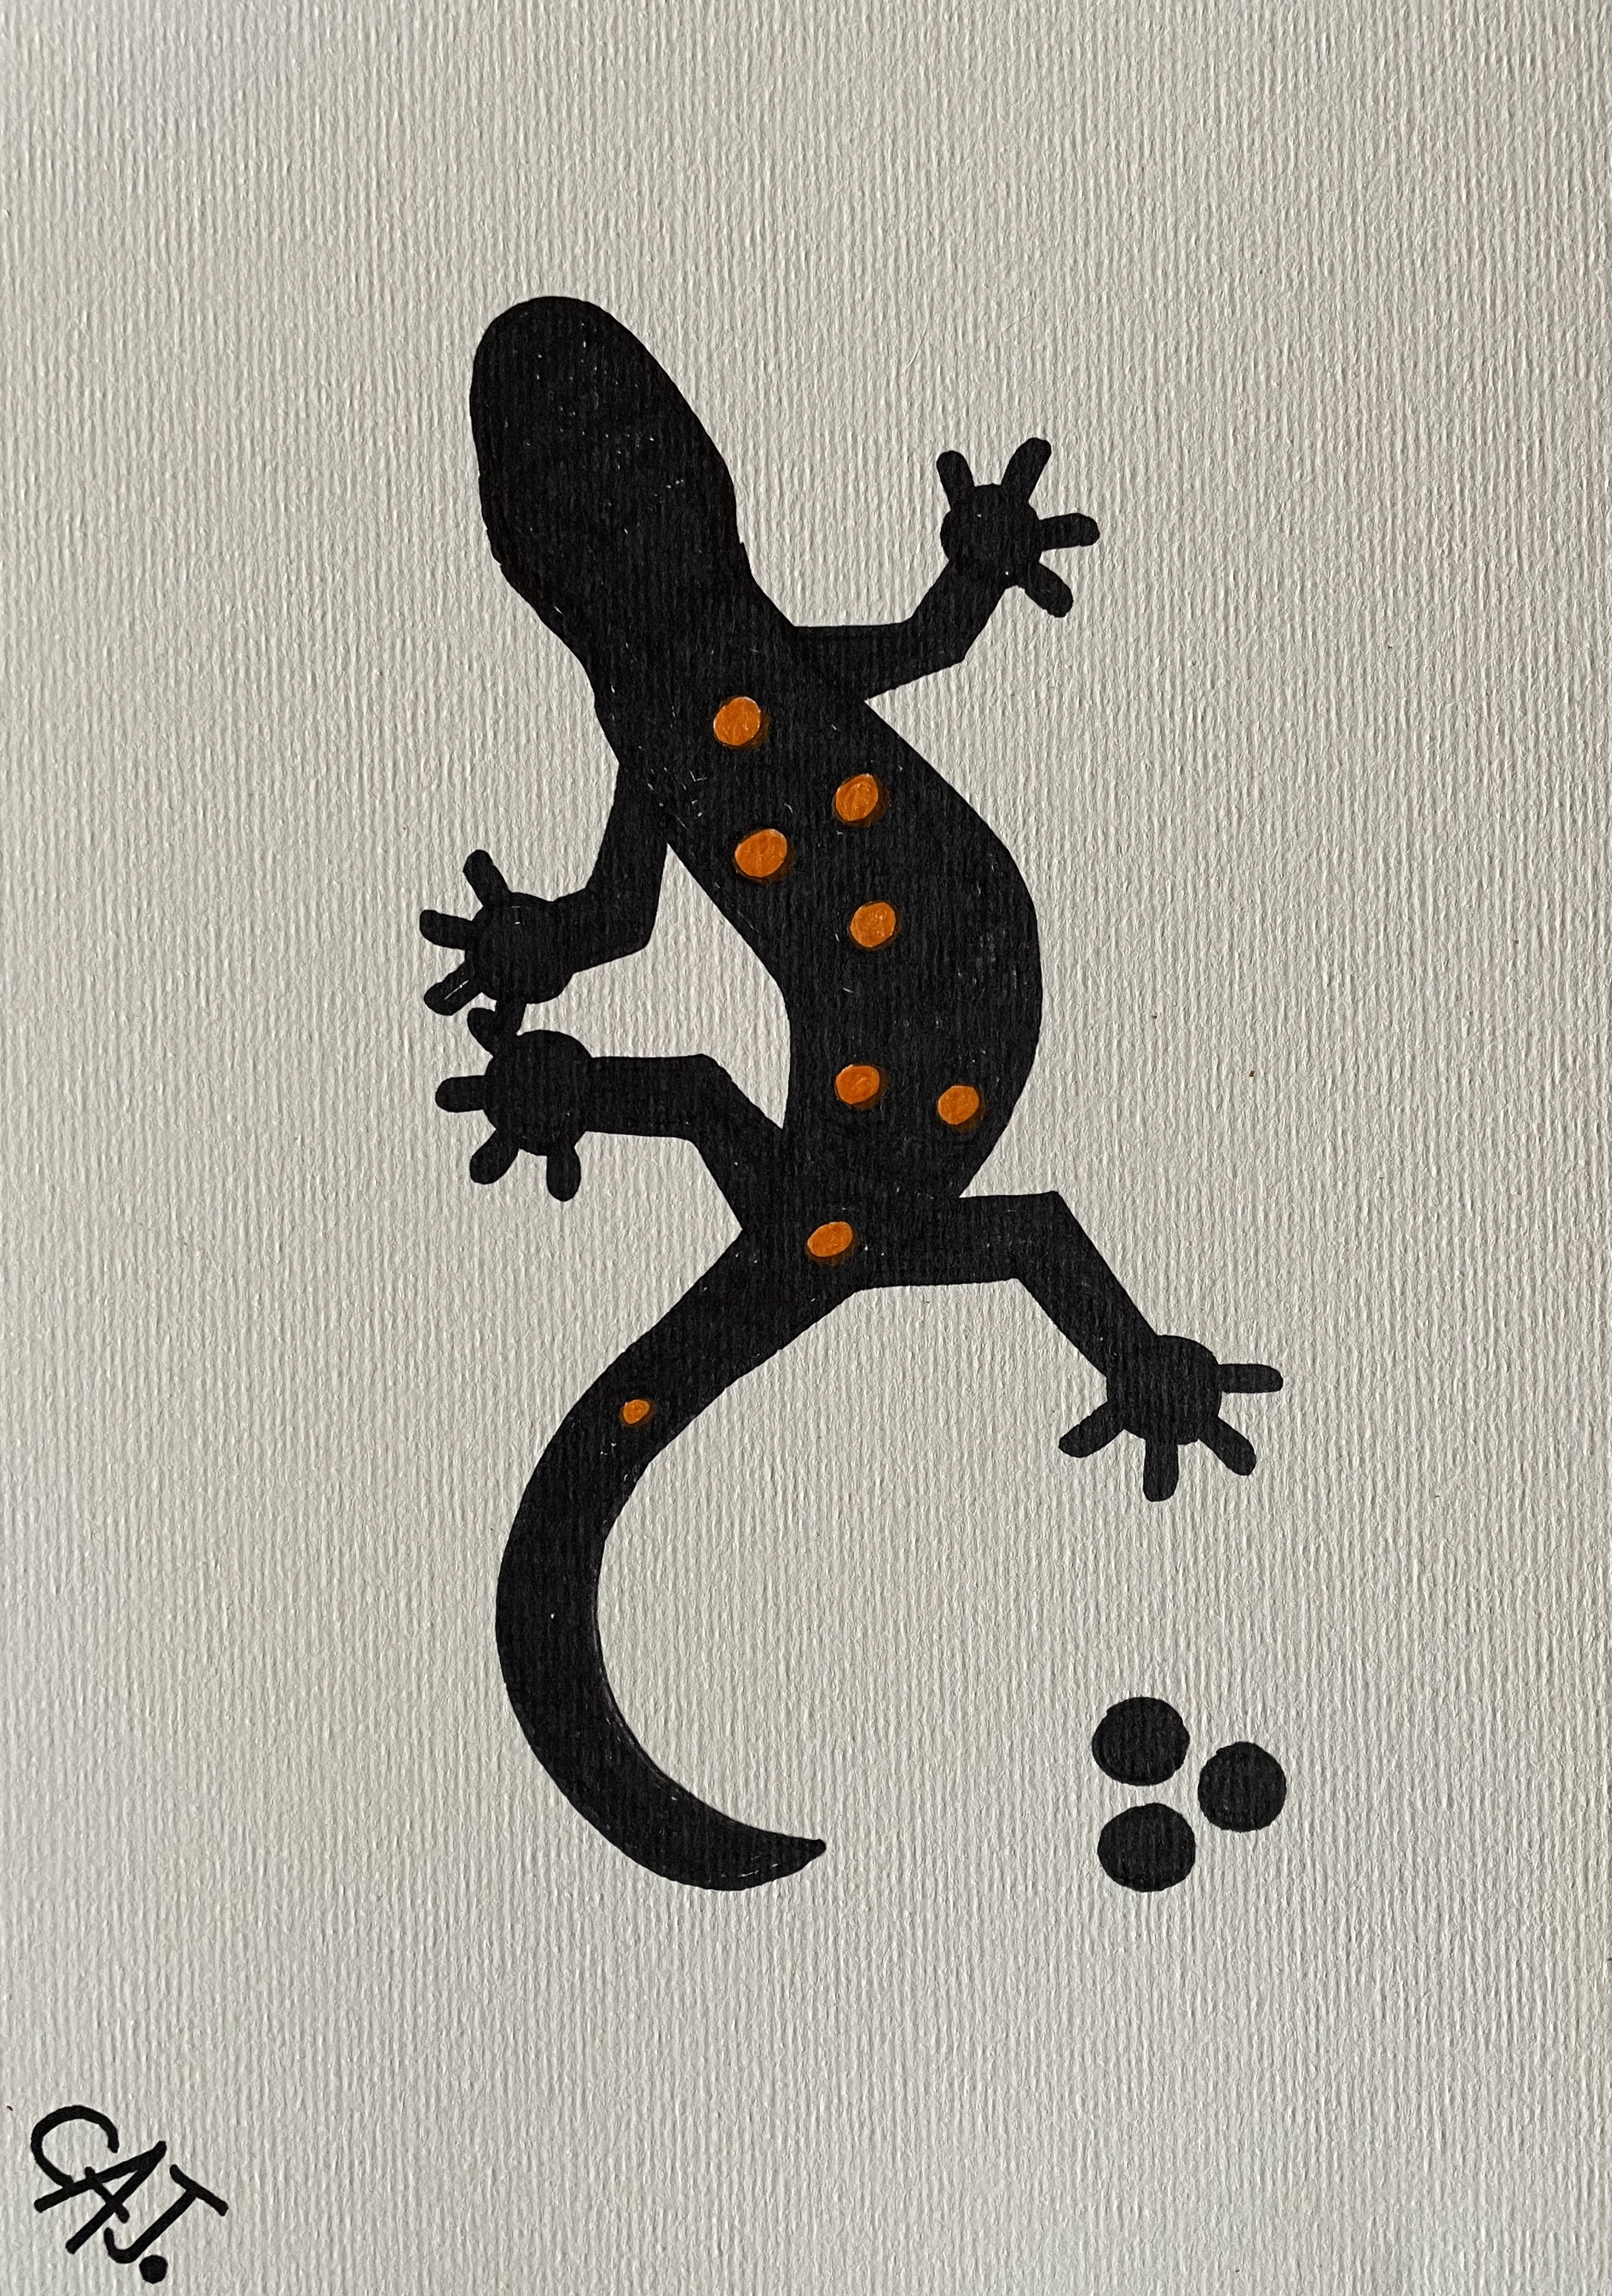 The Gecko!